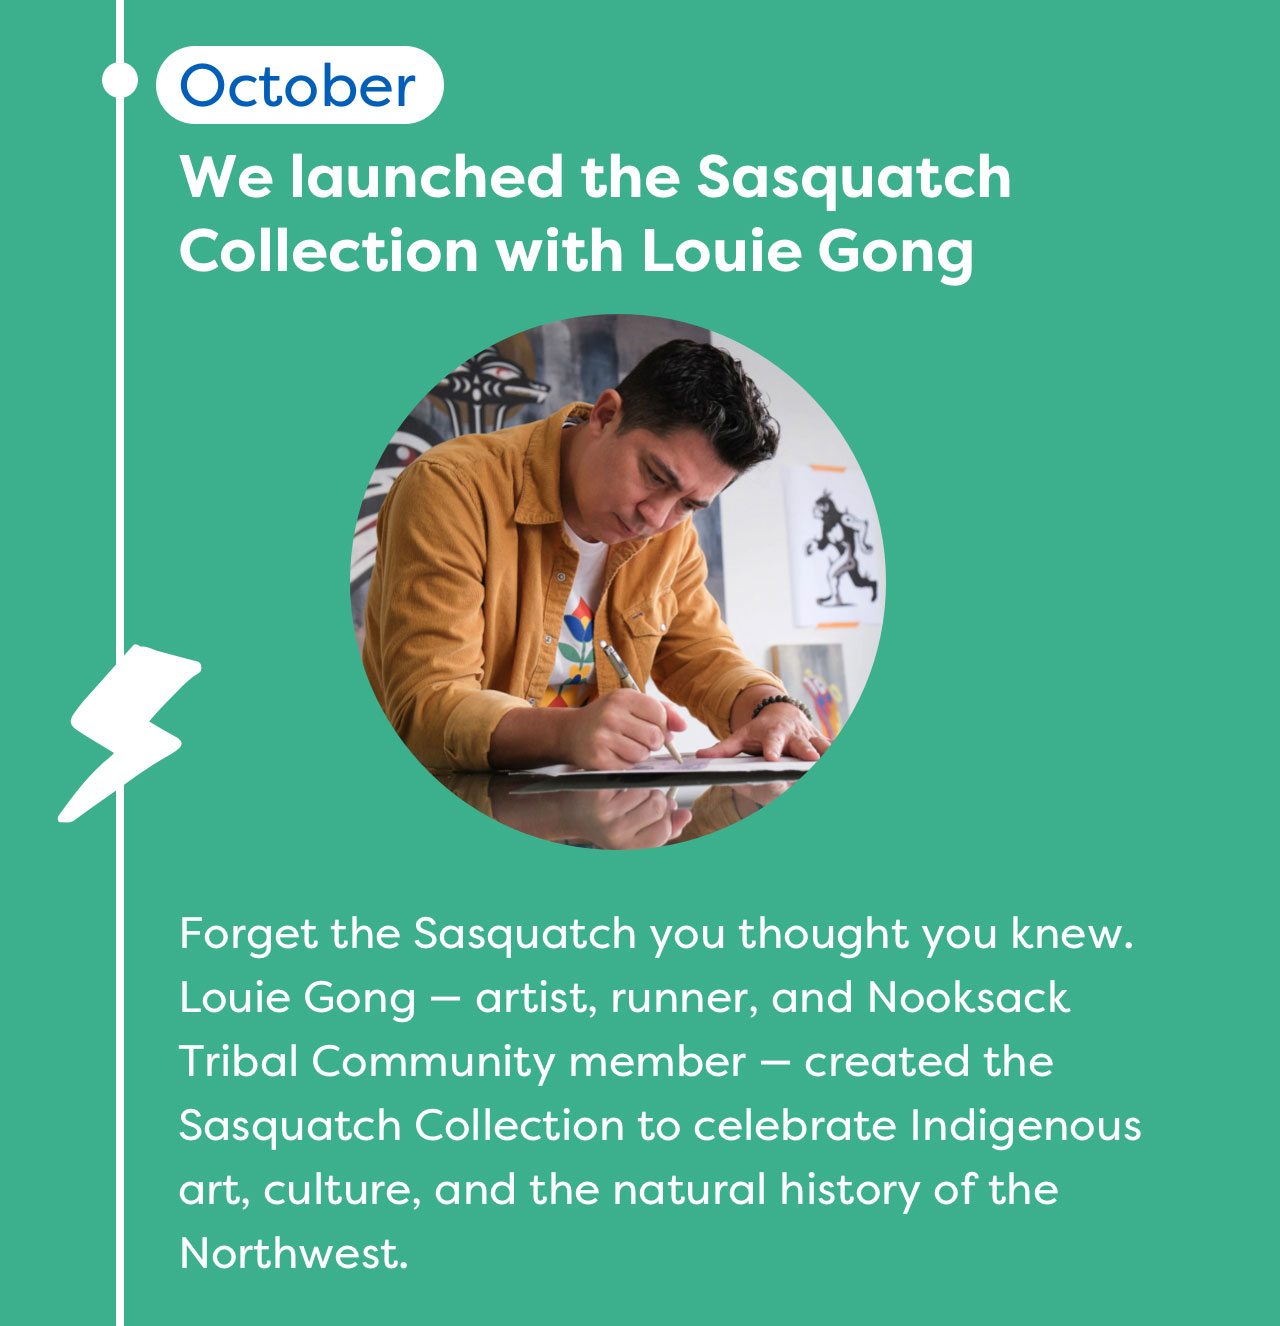 We launched the Sasquatch Collection with Louie Gong